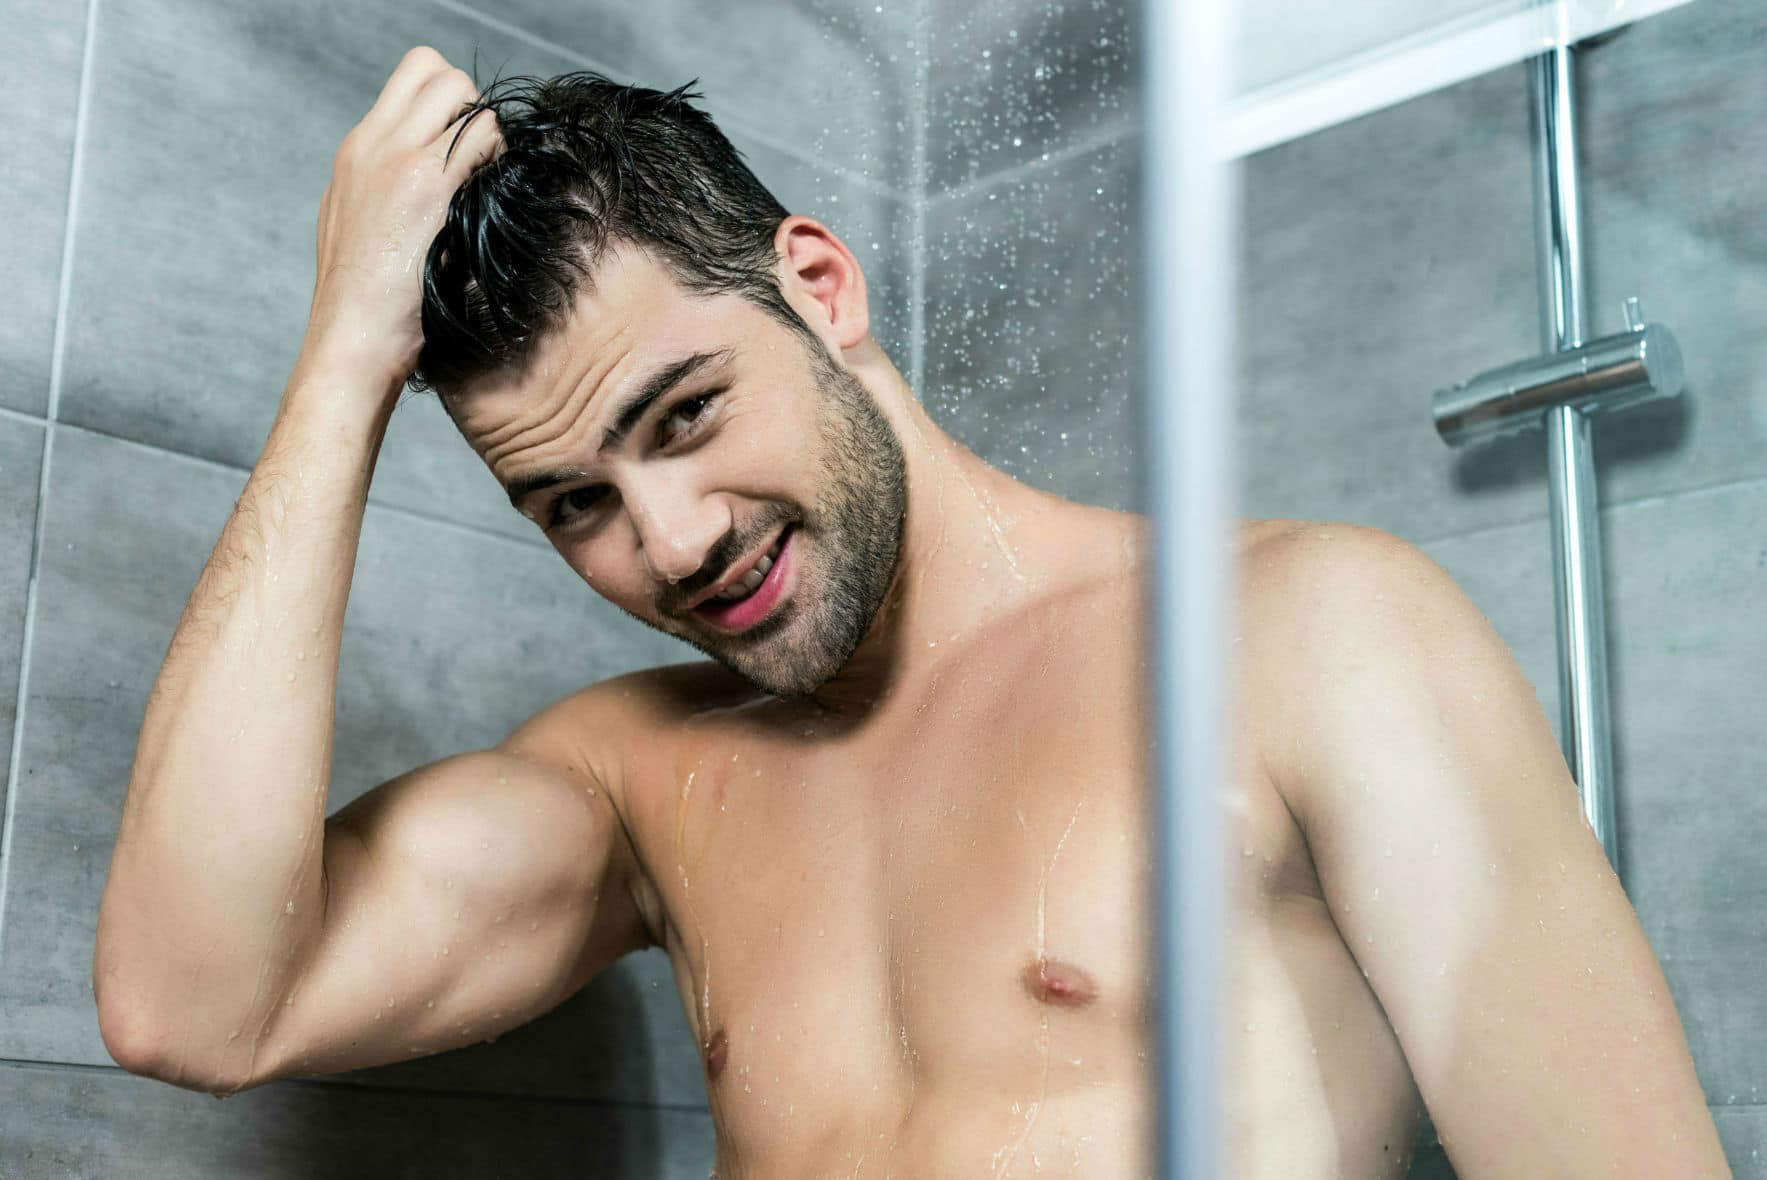 Hair Falling Out in the Shower - Causes, Symptoms & Treatment